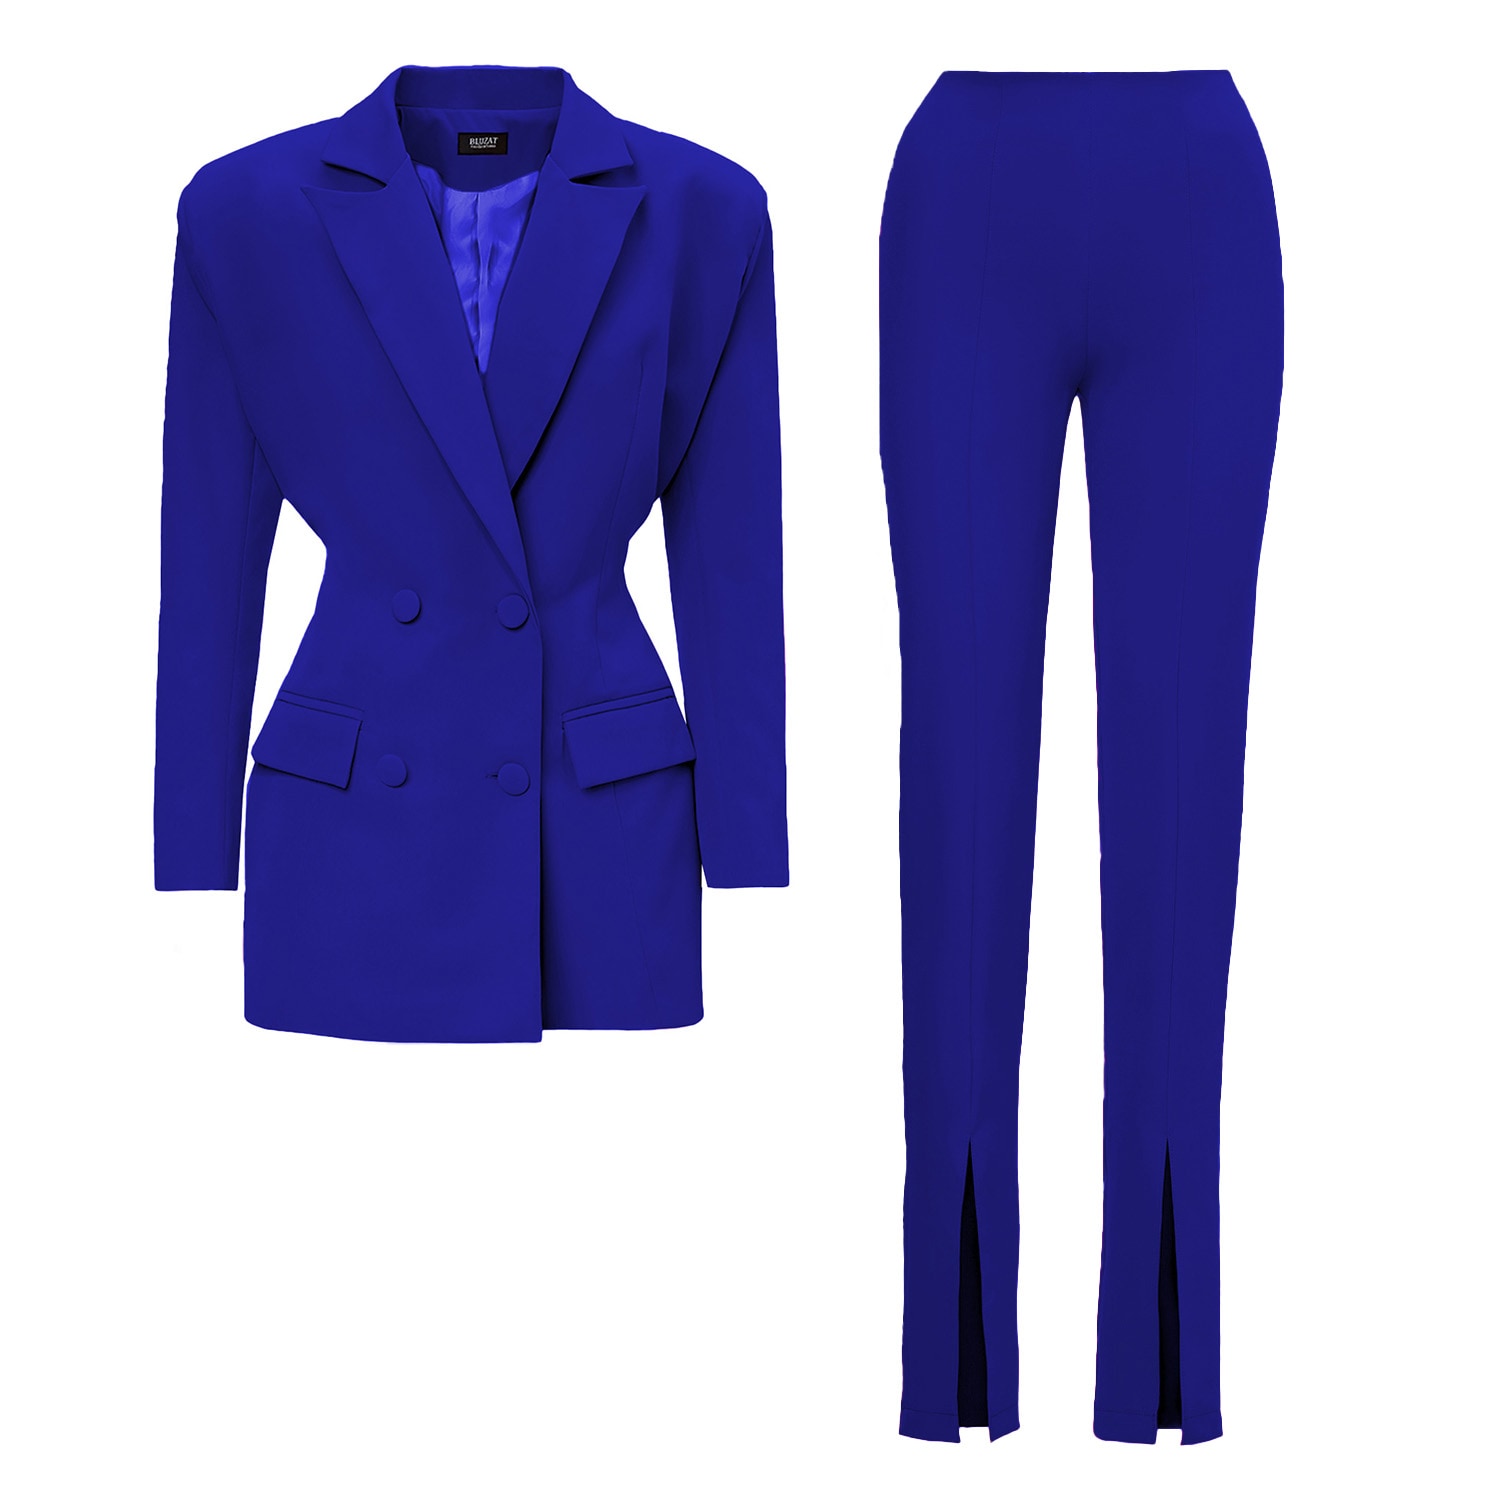 Women’s Electric Blue Suit With Tailored Hourglass Blazer And Slim Fit Trousers Extra Small Bluzat